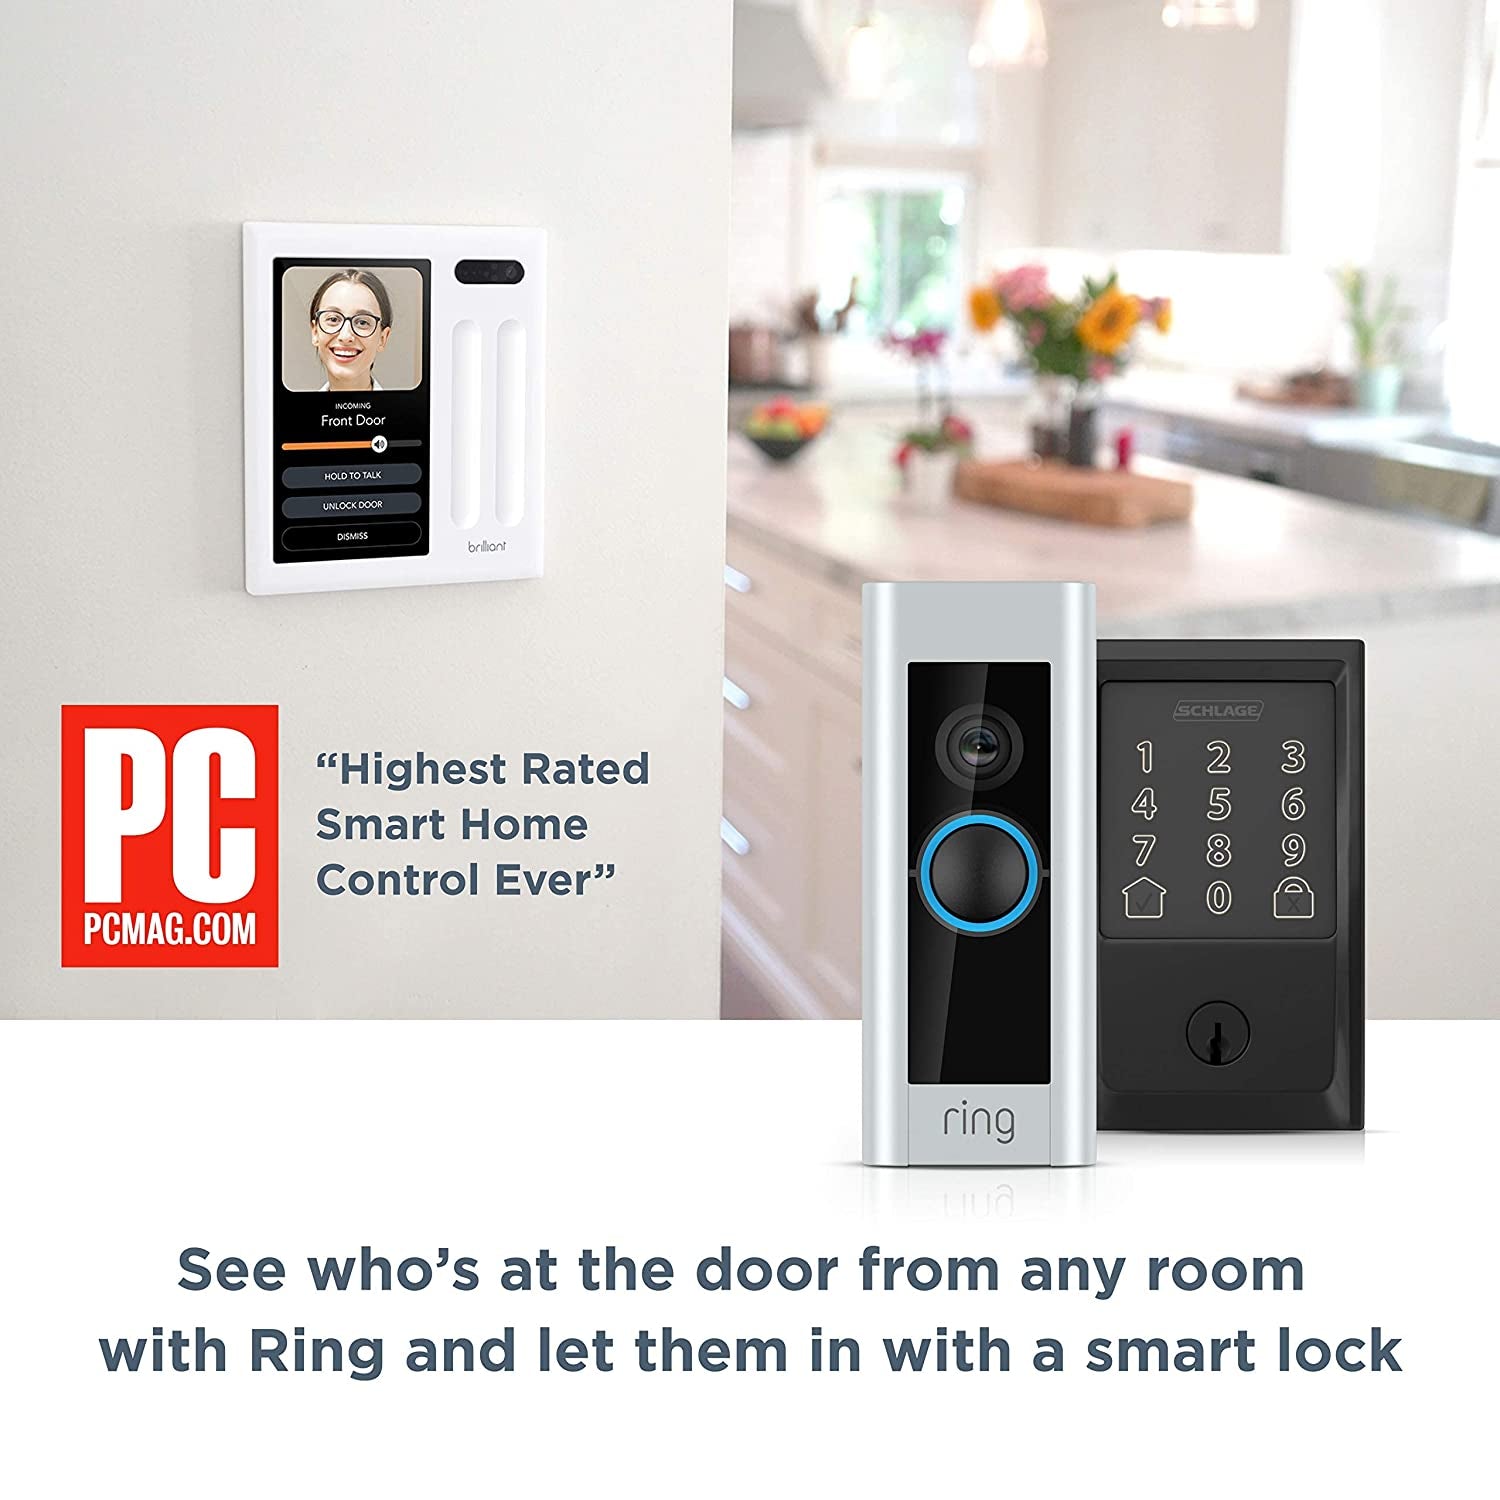 Smart Home Control (3-Switch Panel) — Alexa Built-In & Compatible with Ring, Sonos, Hue, Google Nest, Wemo, Smartthings, Apple Homekit — In-Wall Touchscreen Control for Lights, Music, & More